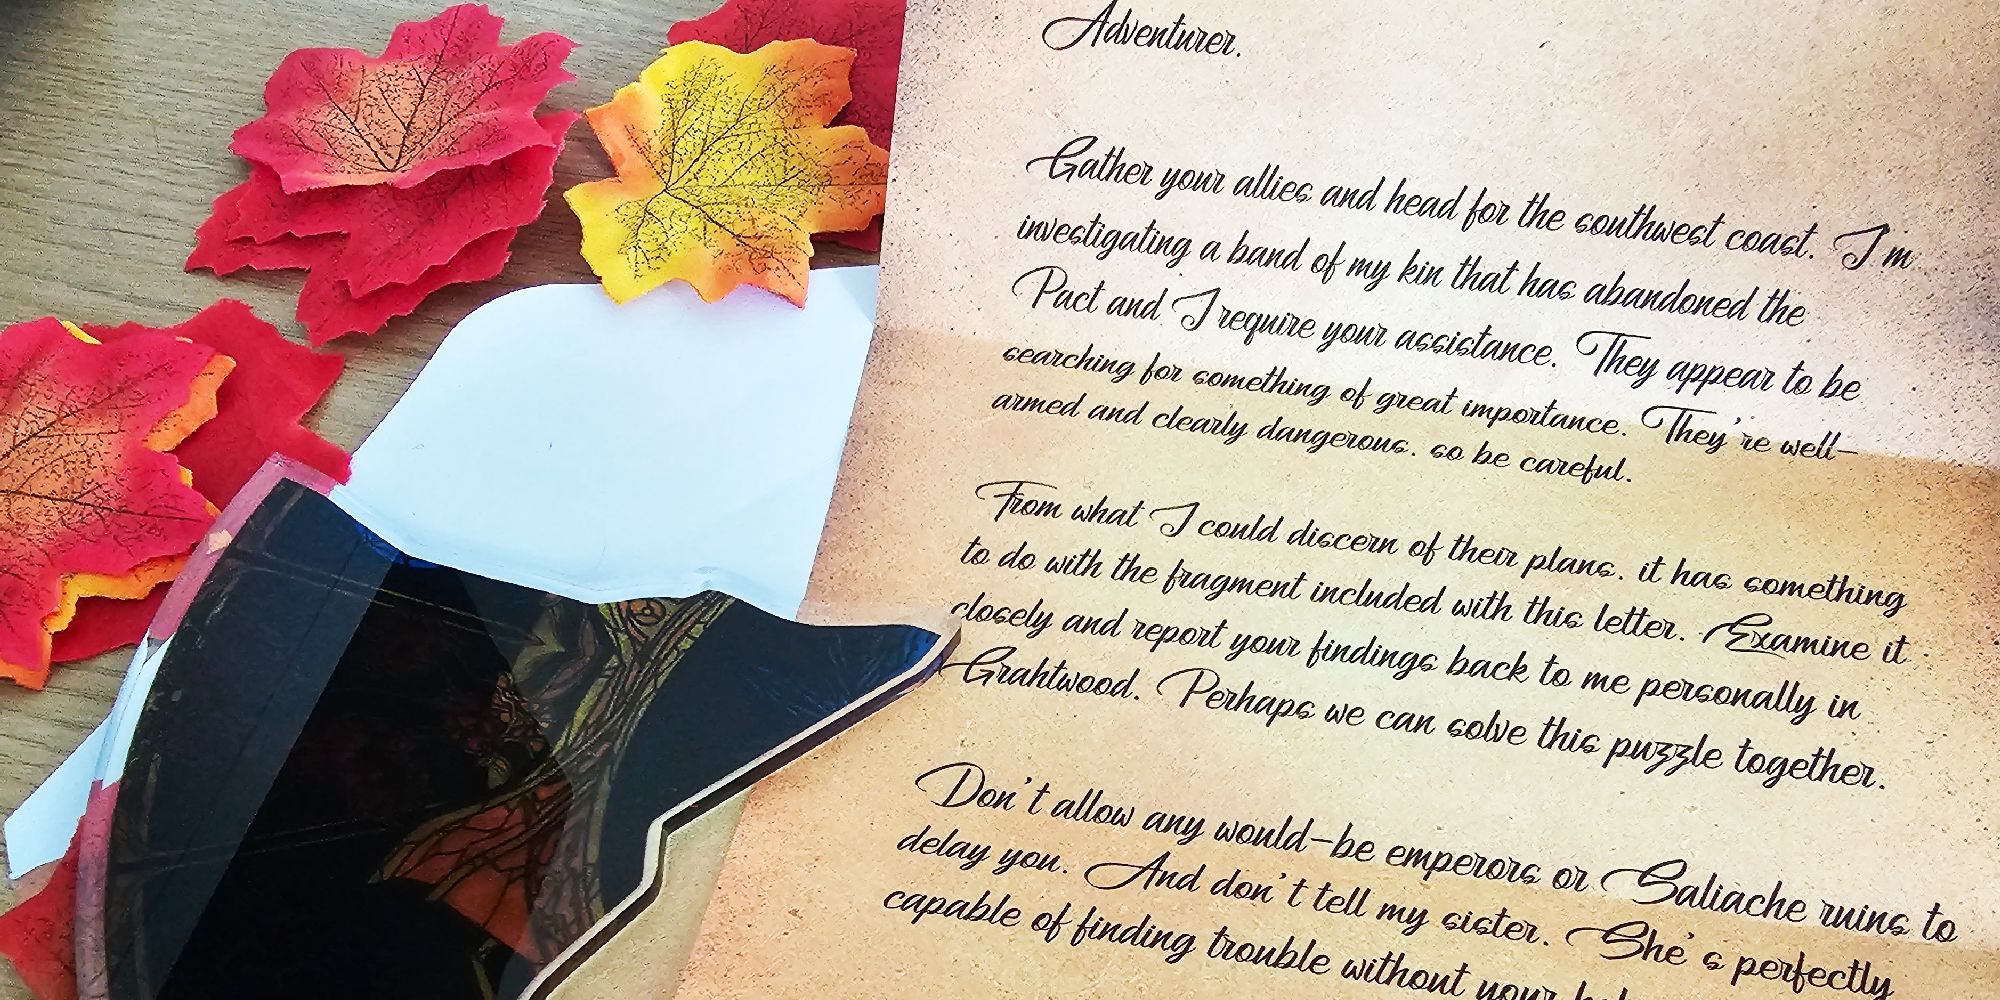 Elder Scrolls Online letter describing the discovery of a fragment which is laying next to the paper surrounded by autumn leaves